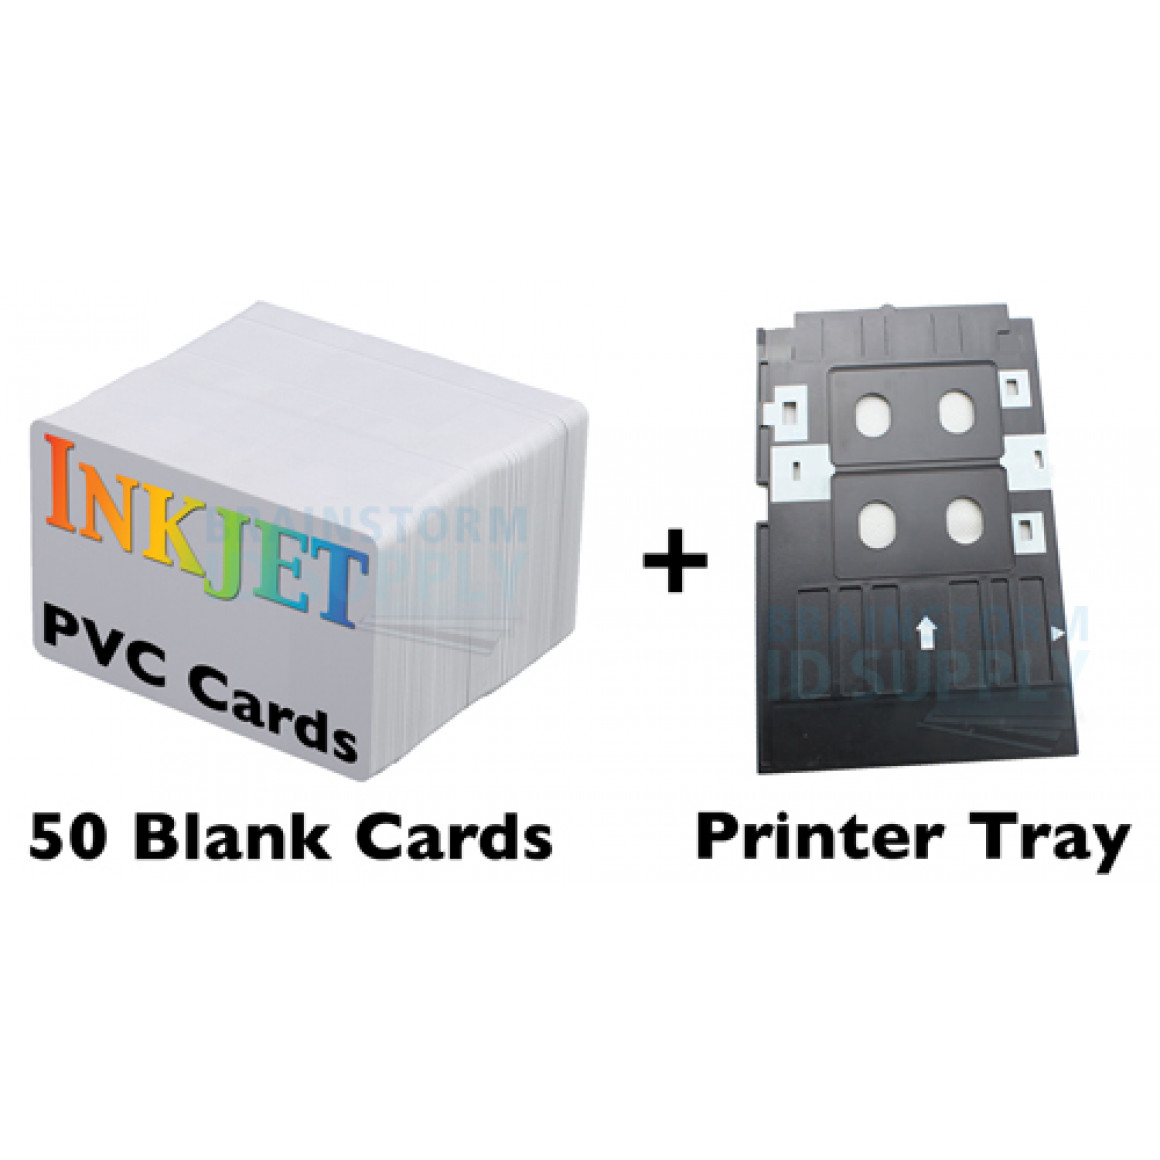 23 PVC Card ID Kit for Inkjet Printers For Pvc Card Template